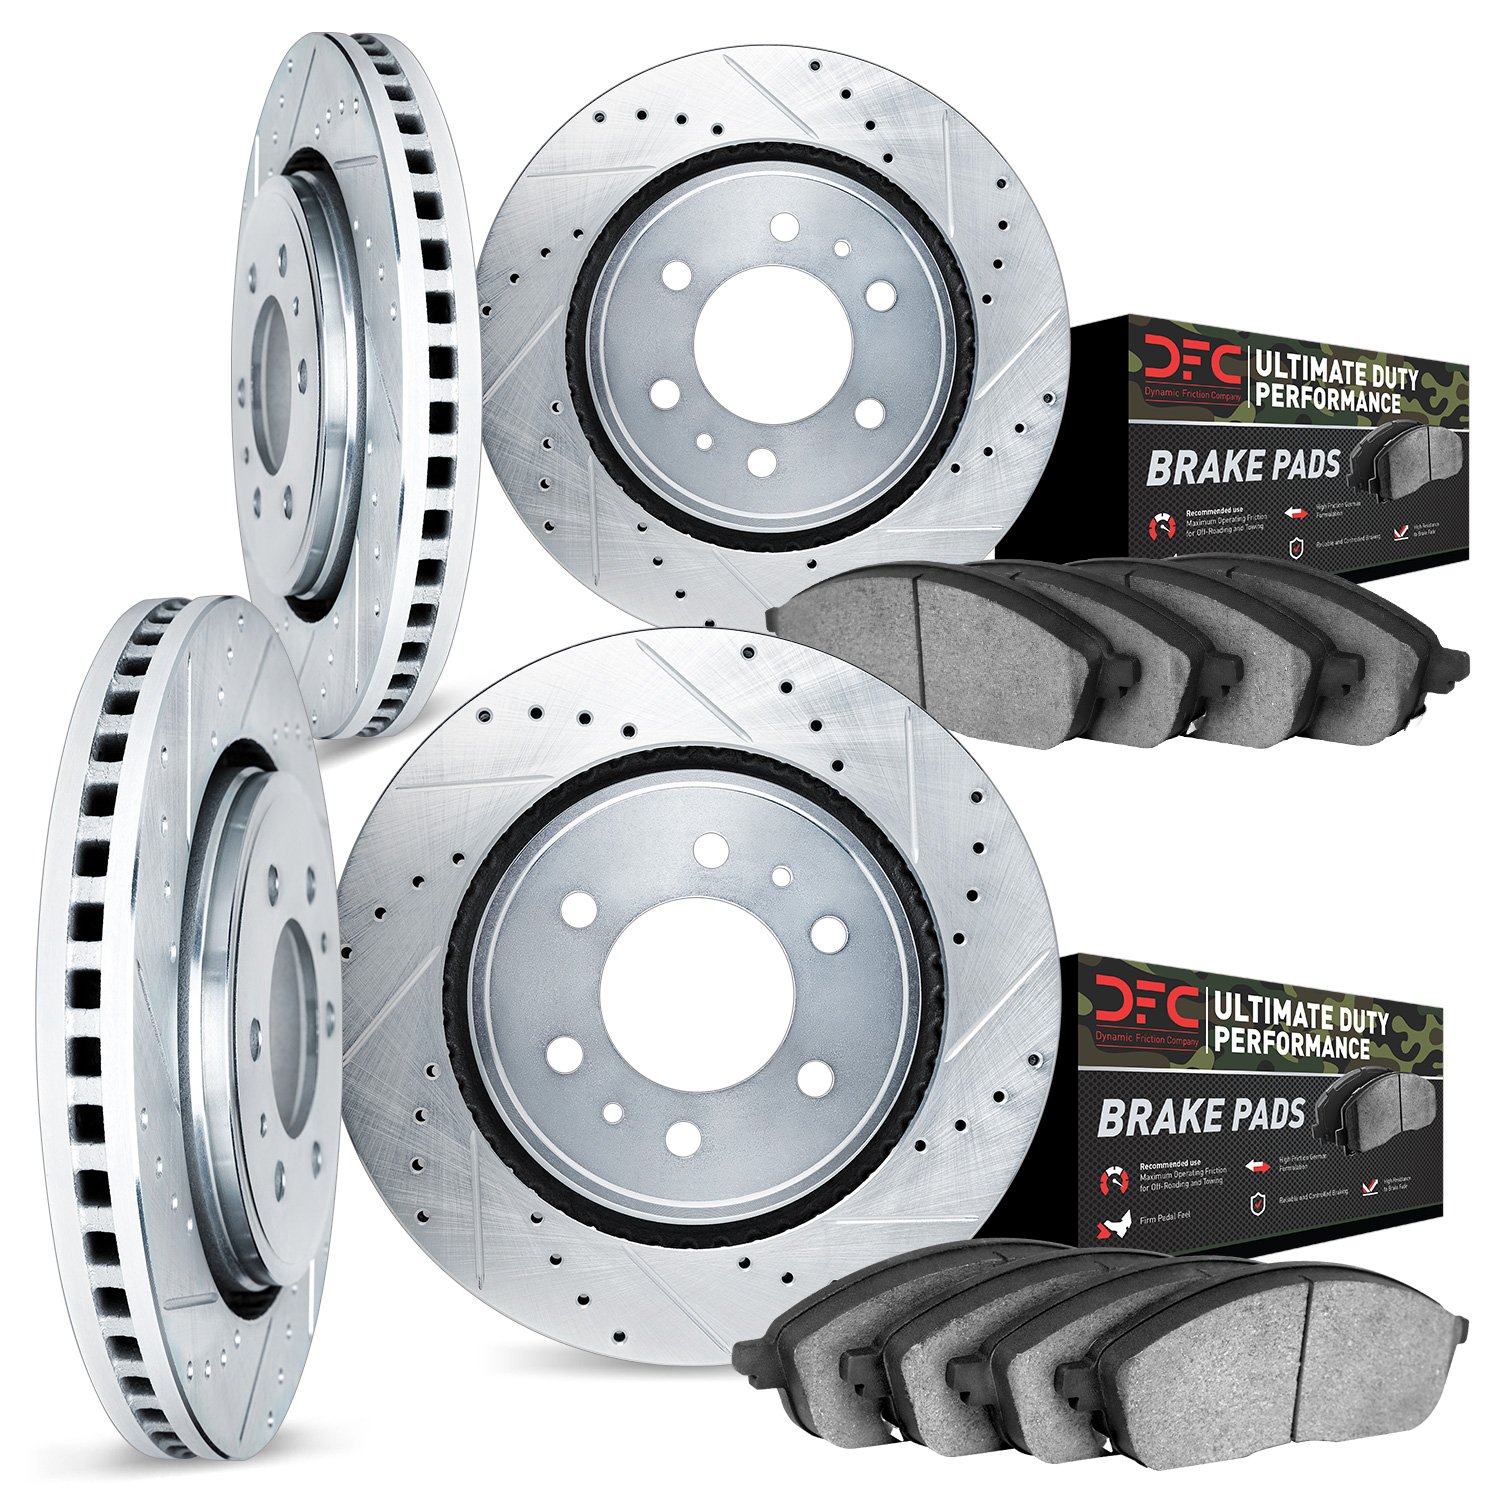 7404-47003 Drilled/Slotted Brake Rotors with Ultimate-Duty Brake Pads Kit [Silver], Fits Select GM, Position: Front and Rear